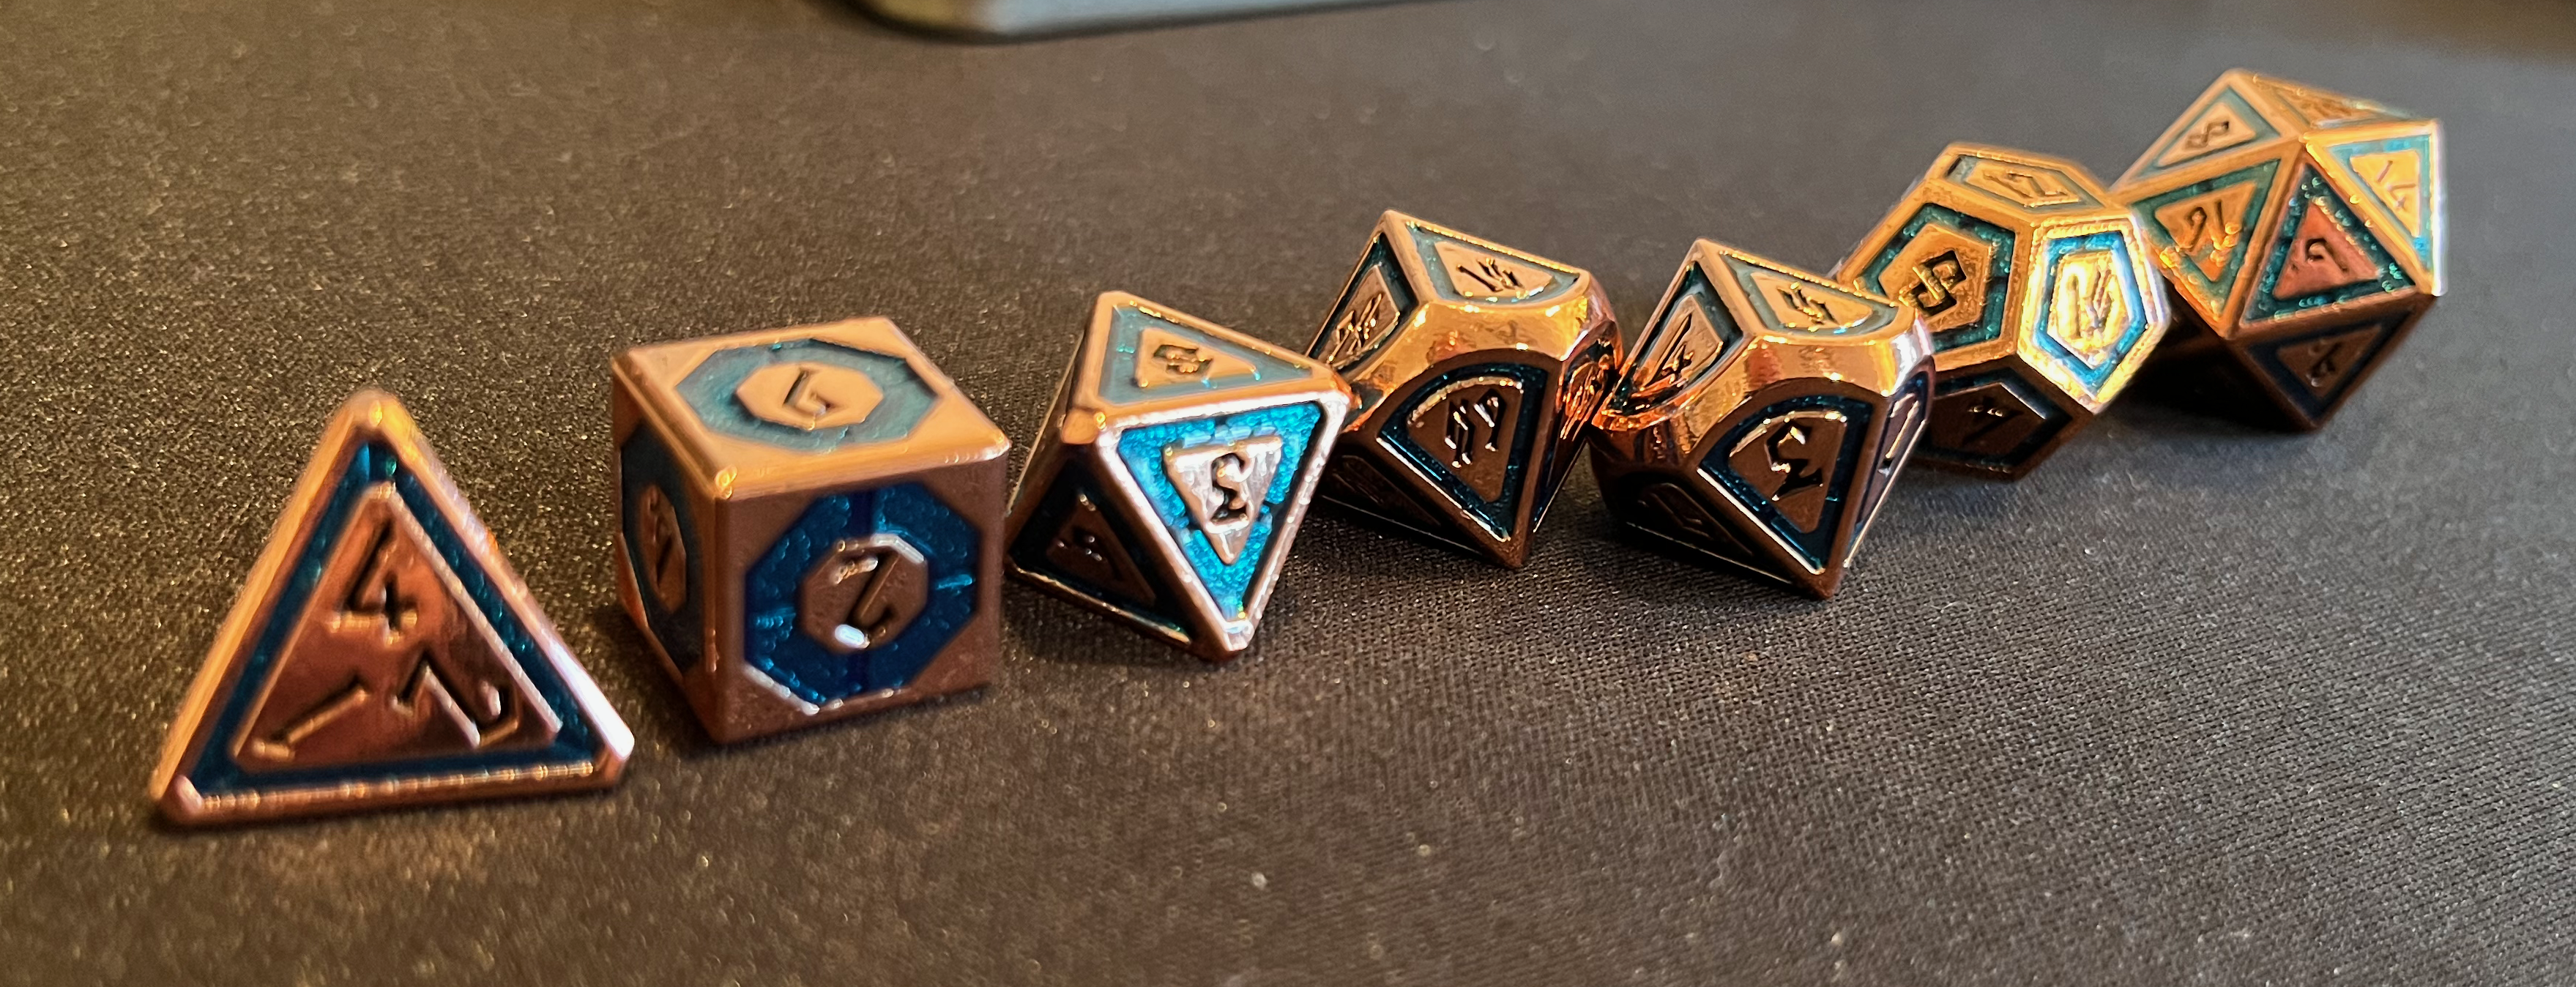 The same metal dice as before, from the front.